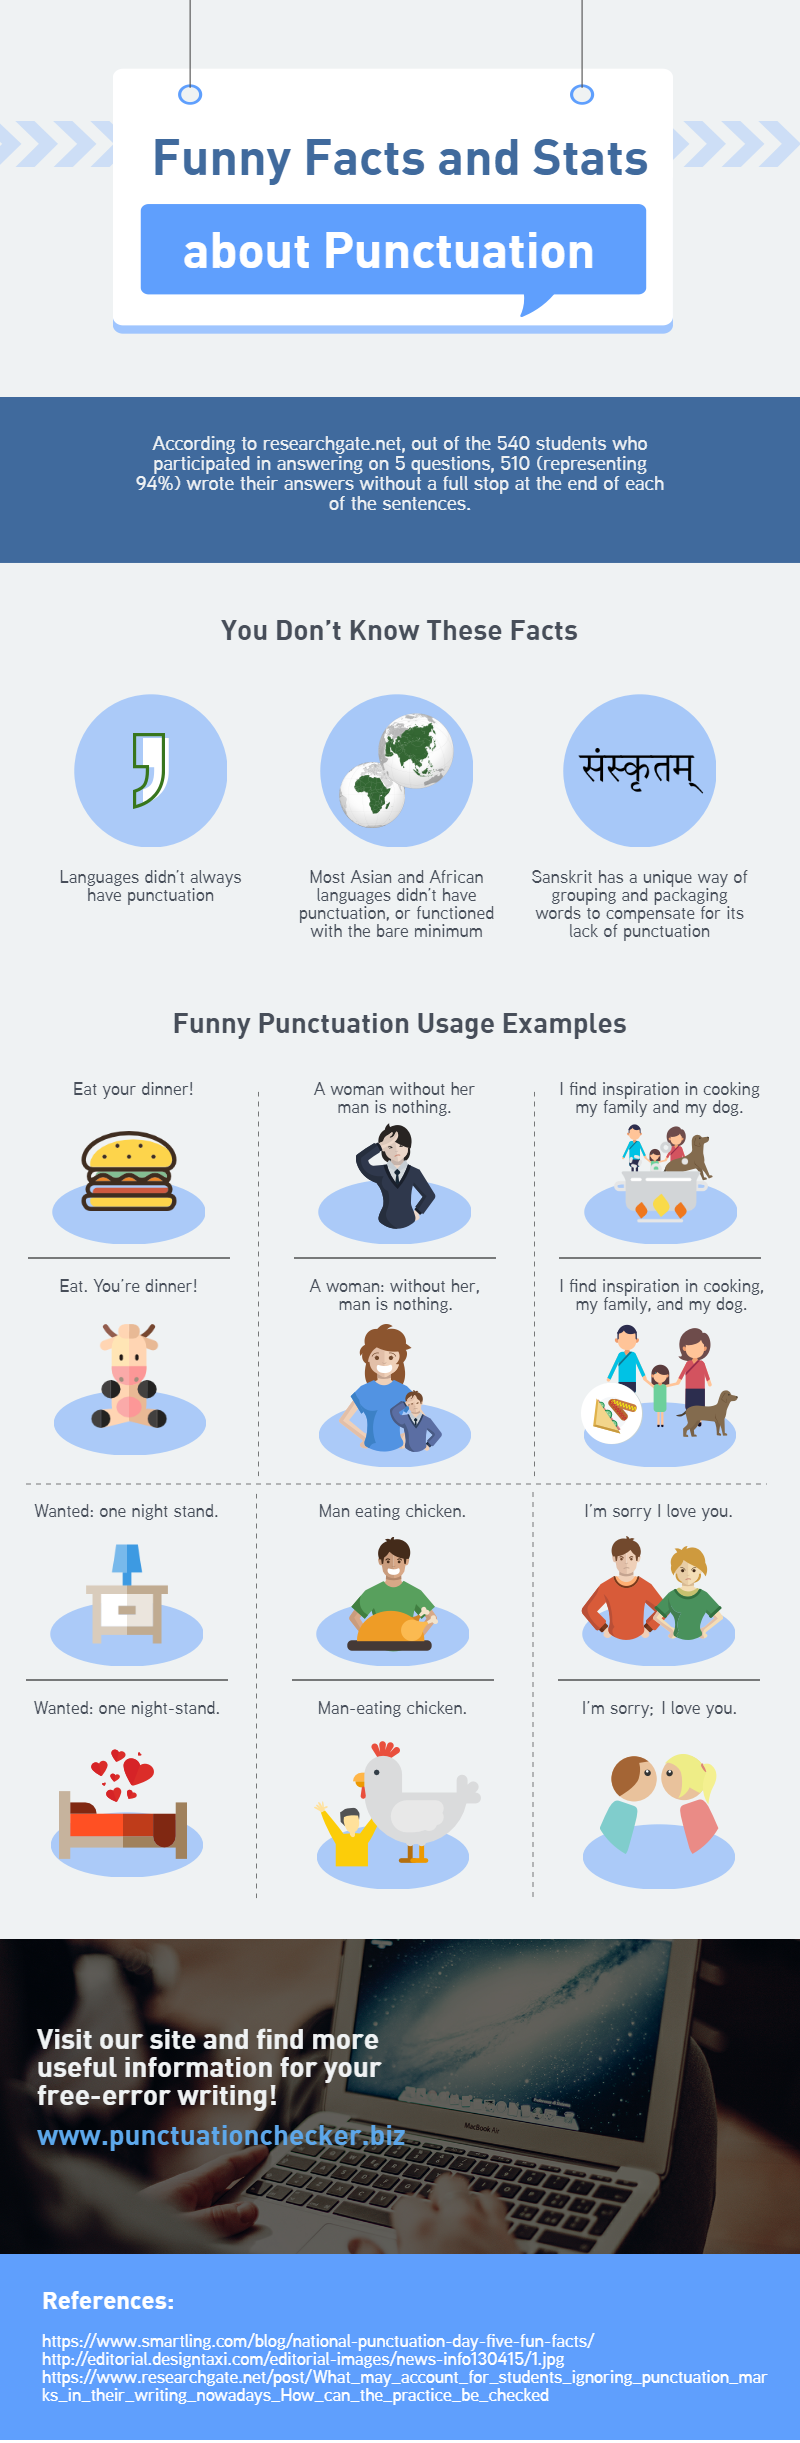 Discover Funny Facts and Stats about Punctuation